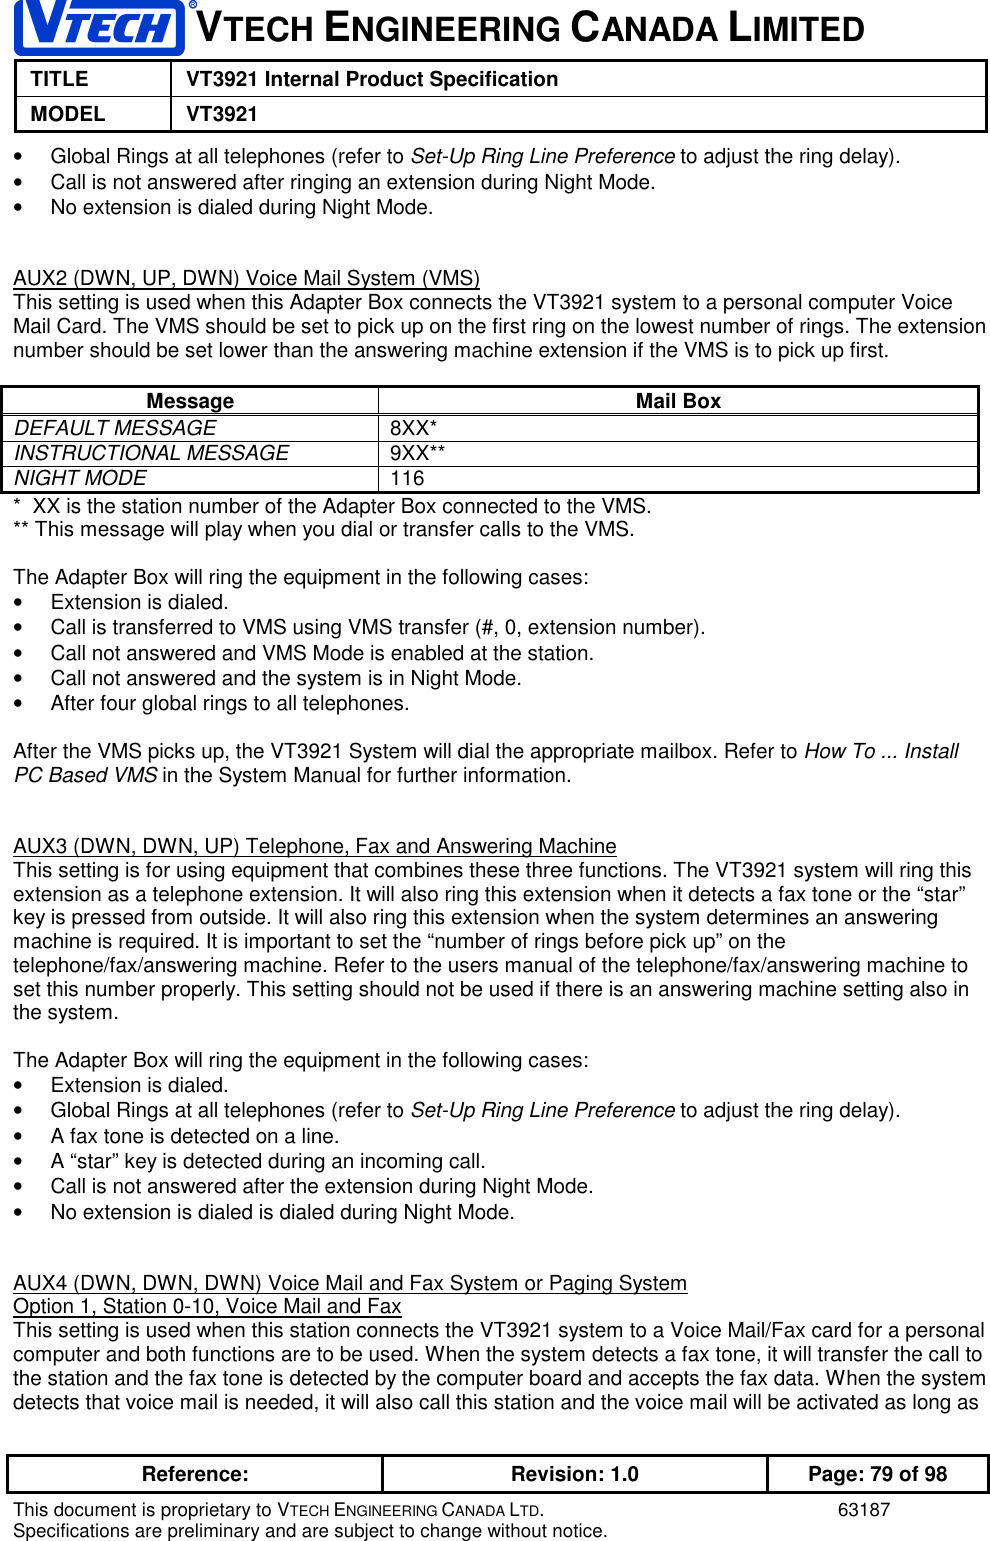 VTECH ENGINEERING CANADA LIMITEDTITLE VT3921 Internal Product SpecificationMODEL VT3921Reference: Revision: 1.0 Page: 79 of 98This document is proprietary to VTECH ENGINEERING CANADA LTD. 63187Specifications are preliminary and are subject to change without notice.•  Global Rings at all telephones (refer to Set-Up Ring Line Preference to adjust the ring delay).•  Call is not answered after ringing an extension during Night Mode.•  No extension is dialed during Night Mode.AUX2 (DWN, UP, DWN) Voice Mail System (VMS)This setting is used when this Adapter Box connects the VT3921 system to a personal computer VoiceMail Card. The VMS should be set to pick up on the first ring on the lowest number of rings. The extensionnumber should be set lower than the answering machine extension if the VMS is to pick up first.Message Mail BoxDEFAULT MESSAGE 8XX*INSTRUCTIONAL MESSAGE 9XX**NIGHT MODE 116*  XX is the station number of the Adapter Box connected to the VMS.** This message will play when you dial or transfer calls to the VMS.The Adapter Box will ring the equipment in the following cases:•  Extension is dialed.•  Call is transferred to VMS using VMS transfer (#, 0, extension number).•  Call not answered and VMS Mode is enabled at the station.•  Call not answered and the system is in Night Mode.•  After four global rings to all telephones.After the VMS picks up, the VT3921 System will dial the appropriate mailbox. Refer to How To ... InstallPC Based VMS in the System Manual for further information.AUX3 (DWN, DWN, UP) Telephone, Fax and Answering MachineThis setting is for using equipment that combines these three functions. The VT3921 system will ring thisextension as a telephone extension. It will also ring this extension when it detects a fax tone or the “star”key is pressed from outside. It will also ring this extension when the system determines an answeringmachine is required. It is important to set the “number of rings before pick up” on thetelephone/fax/answering machine. Refer to the users manual of the telephone/fax/answering machine toset this number properly. This setting should not be used if there is an answering machine setting also inthe system.The Adapter Box will ring the equipment in the following cases:•  Extension is dialed.•  Global Rings at all telephones (refer to Set-Up Ring Line Preference to adjust the ring delay).•  A fax tone is detected on a line.•  A “star” key is detected during an incoming call.•  Call is not answered after the extension during Night Mode.•  No extension is dialed is dialed during Night Mode.AUX4 (DWN, DWN, DWN) Voice Mail and Fax System or Paging SystemOption 1, Station 0-10, Voice Mail and FaxThis setting is used when this station connects the VT3921 system to a Voice Mail/Fax card for a personalcomputer and both functions are to be used. When the system detects a fax tone, it will transfer the call tothe station and the fax tone is detected by the computer board and accepts the fax data. When the systemdetects that voice mail is needed, it will also call this station and the voice mail will be activated as long as